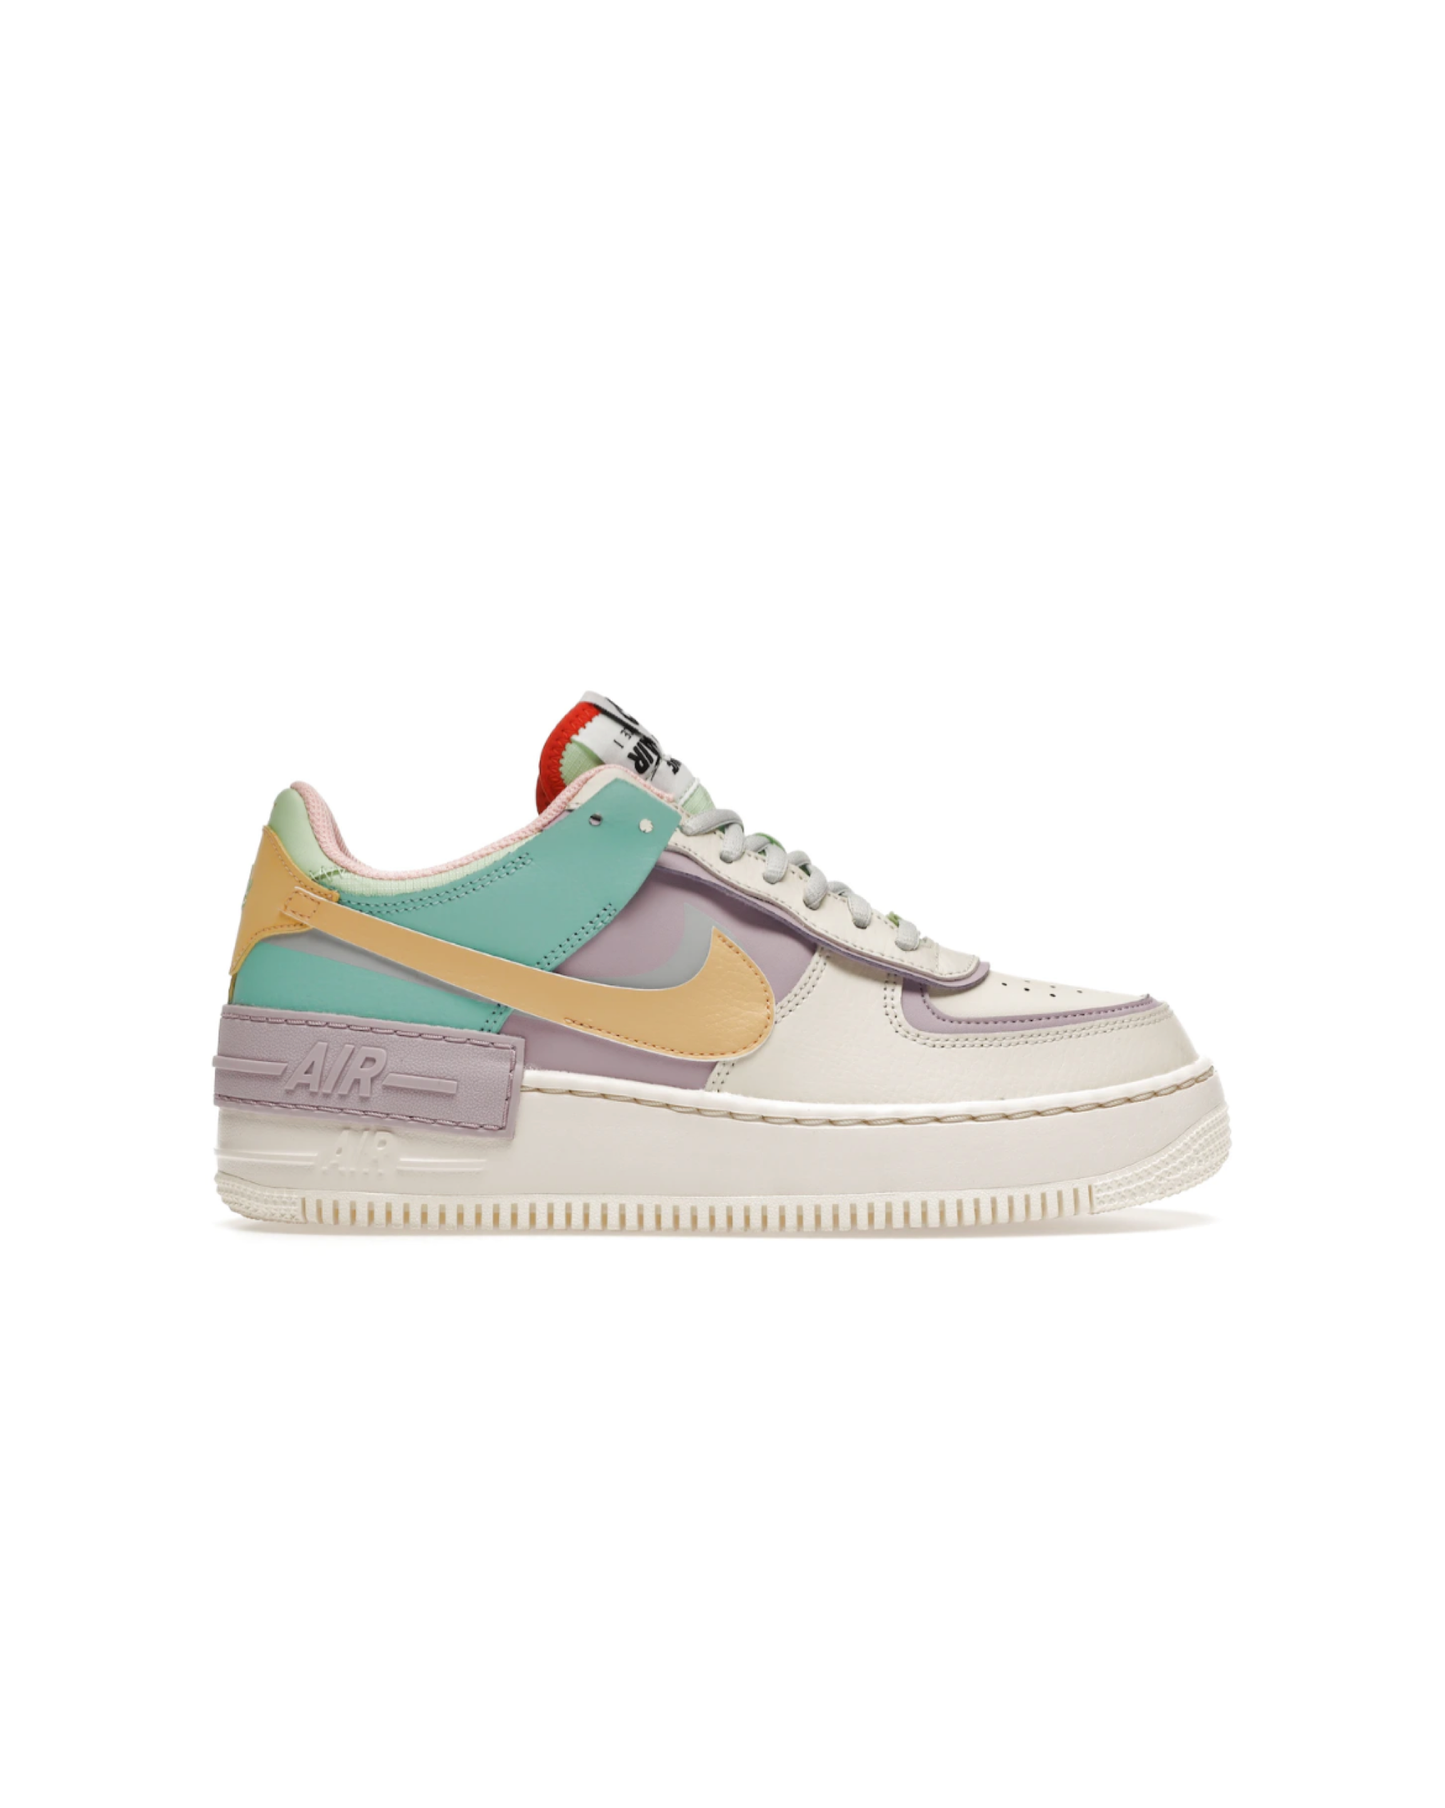 Air Force 1 Shadow
Pale Ivory (Women's)